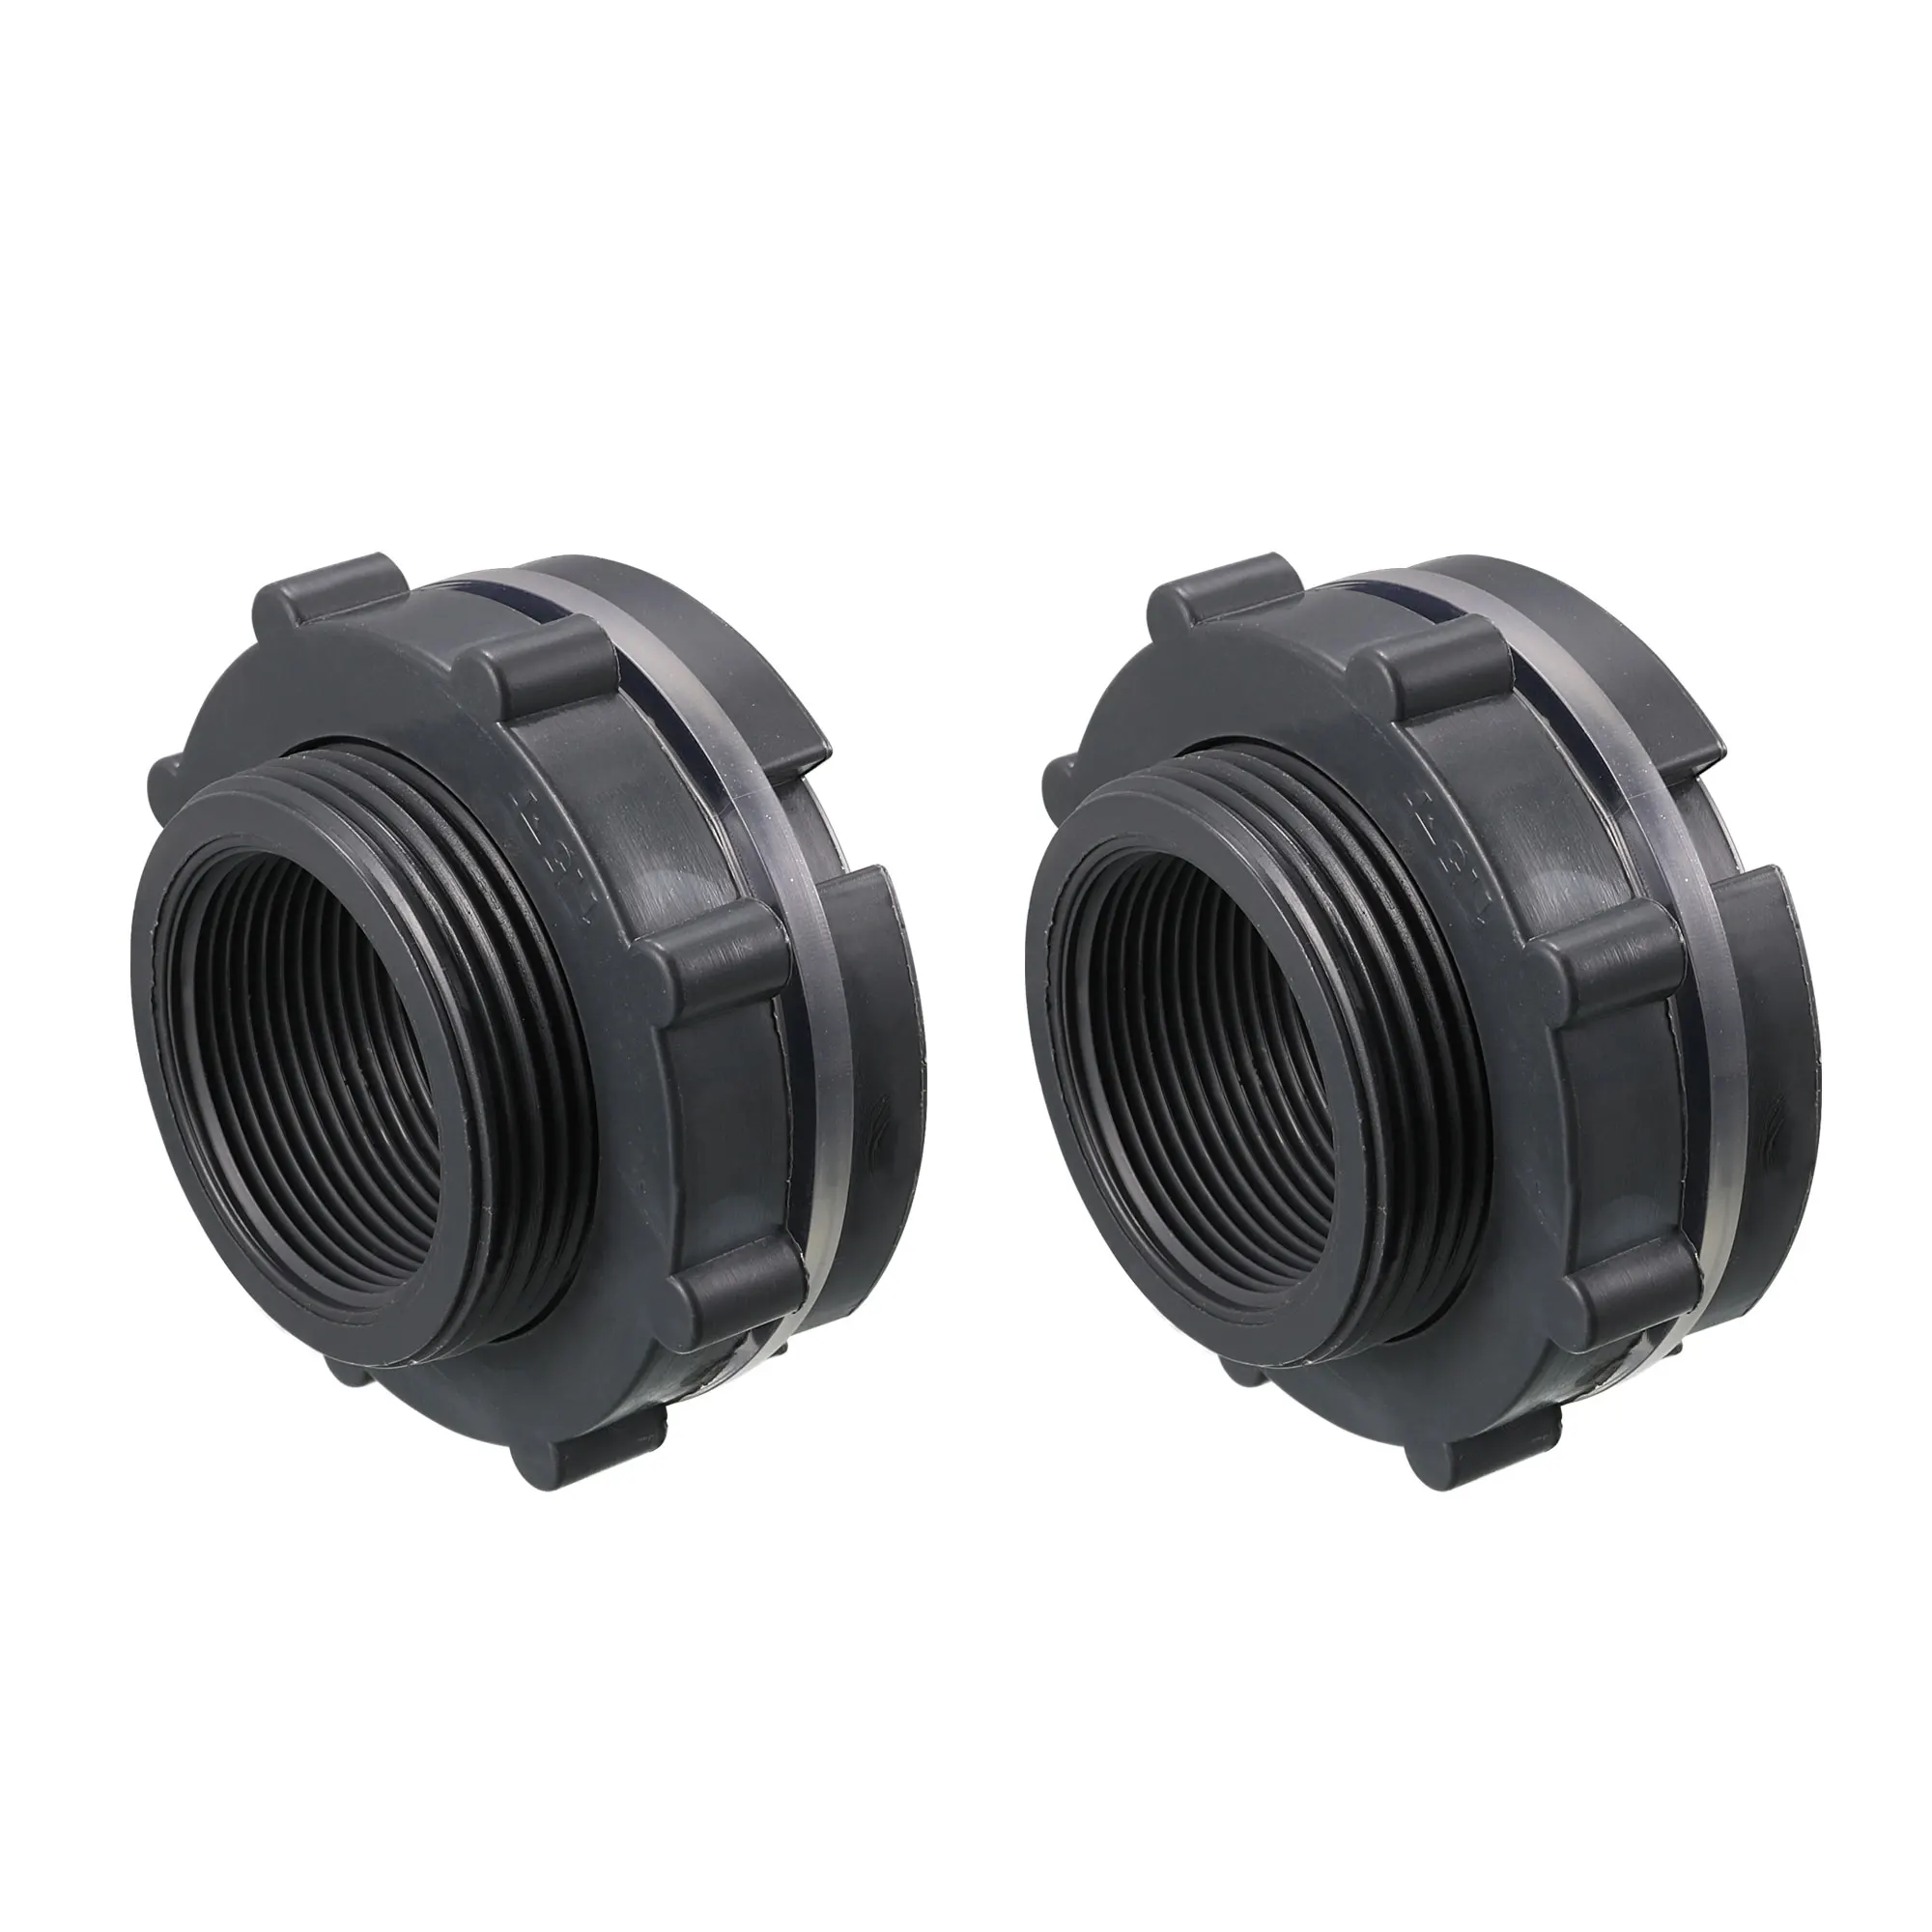 

Uxcell Bulkhead Fitting, G1-1/2 Female, Tube Adaptor Pipe Fitting with Silicone Gasket, for Water Tanks, PVC, Gray 2Pcs